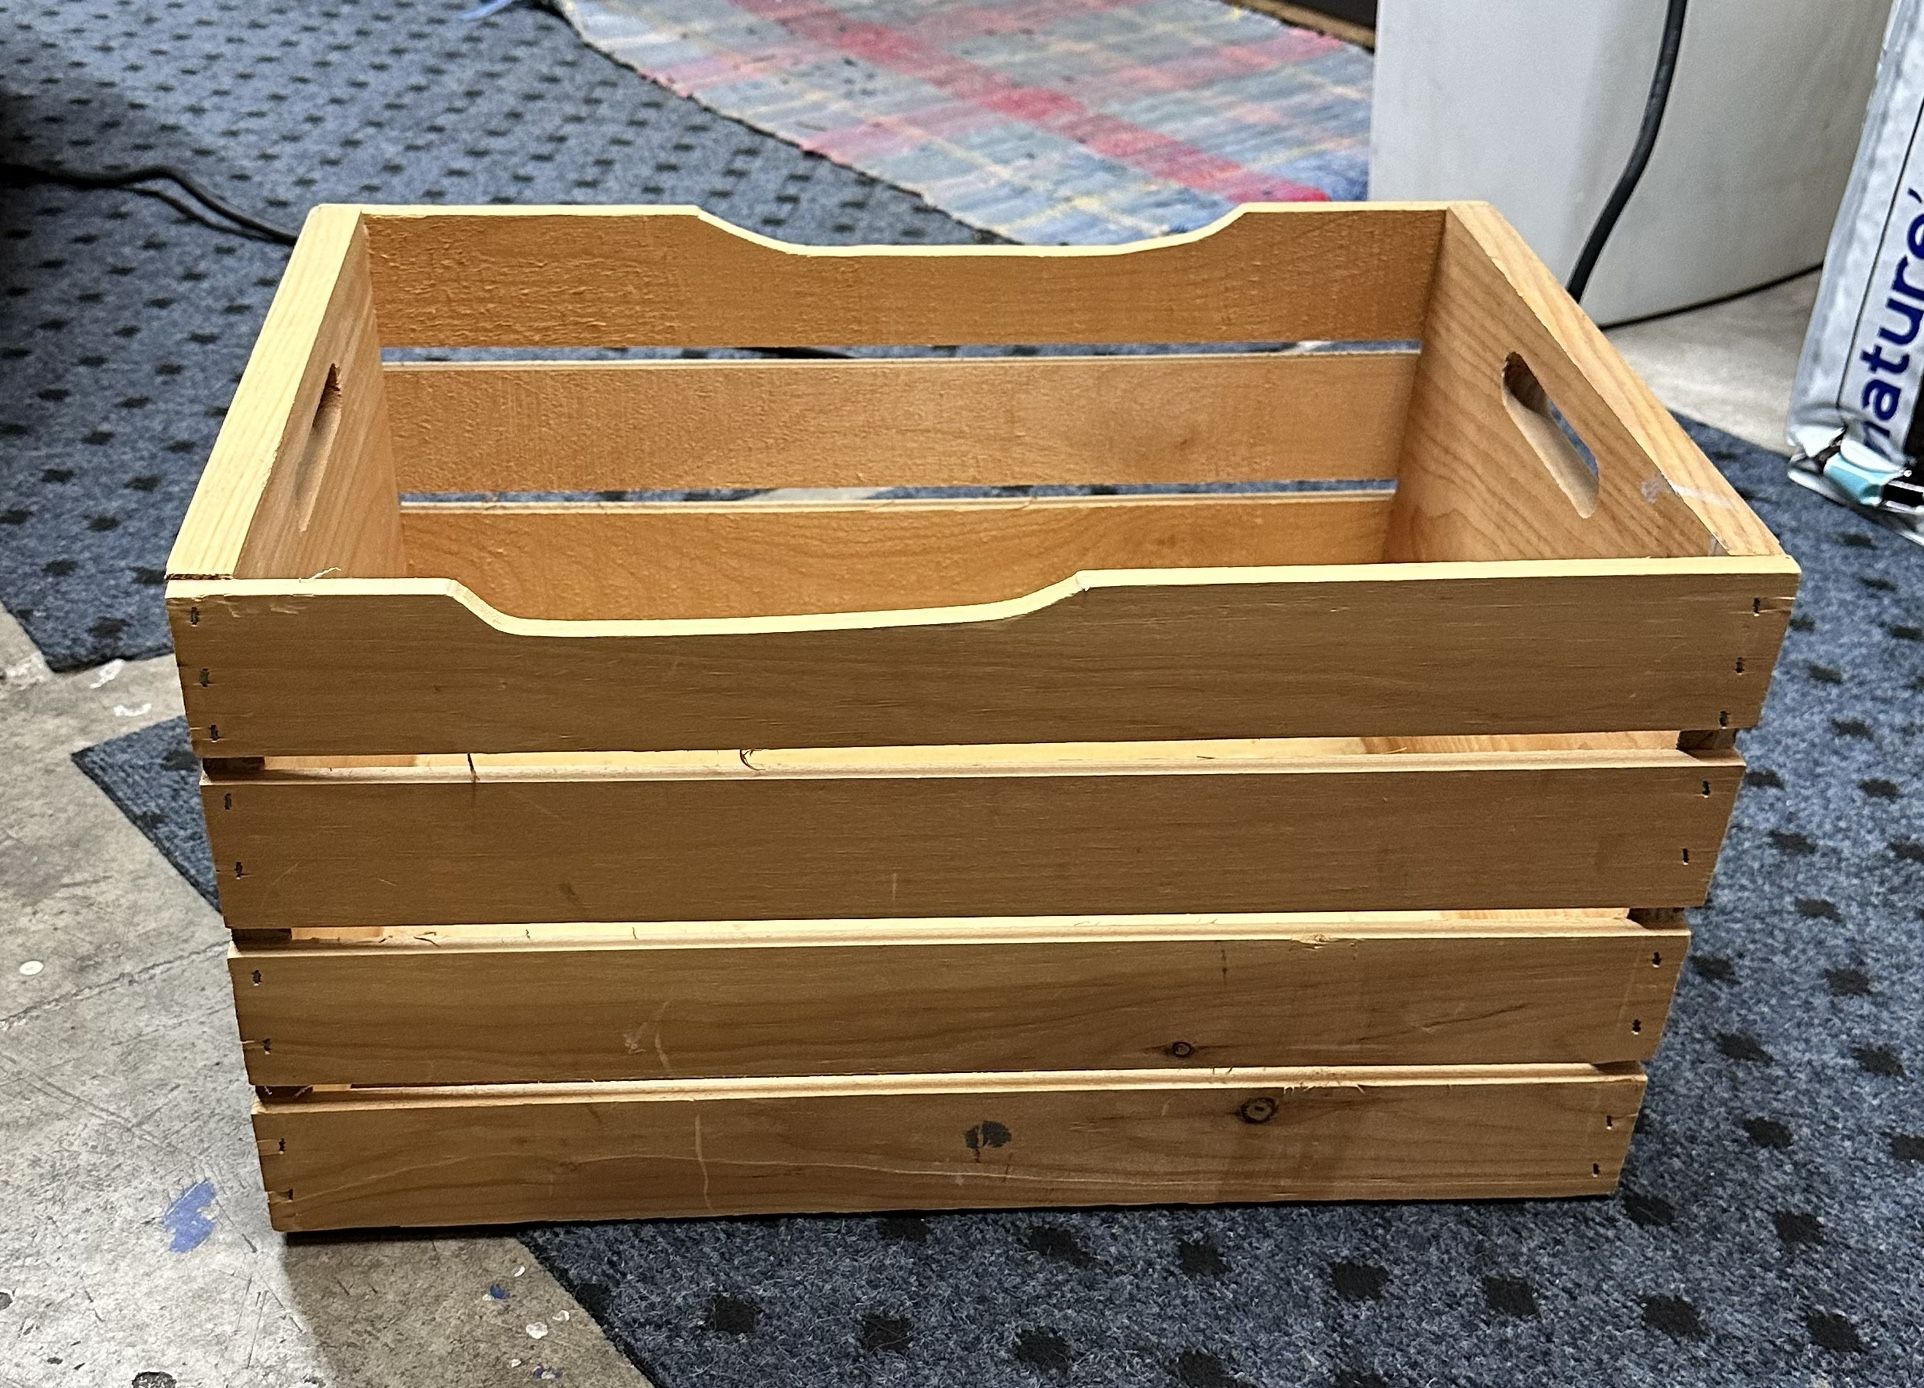 Wood Crate - For Storage Or Crafting 